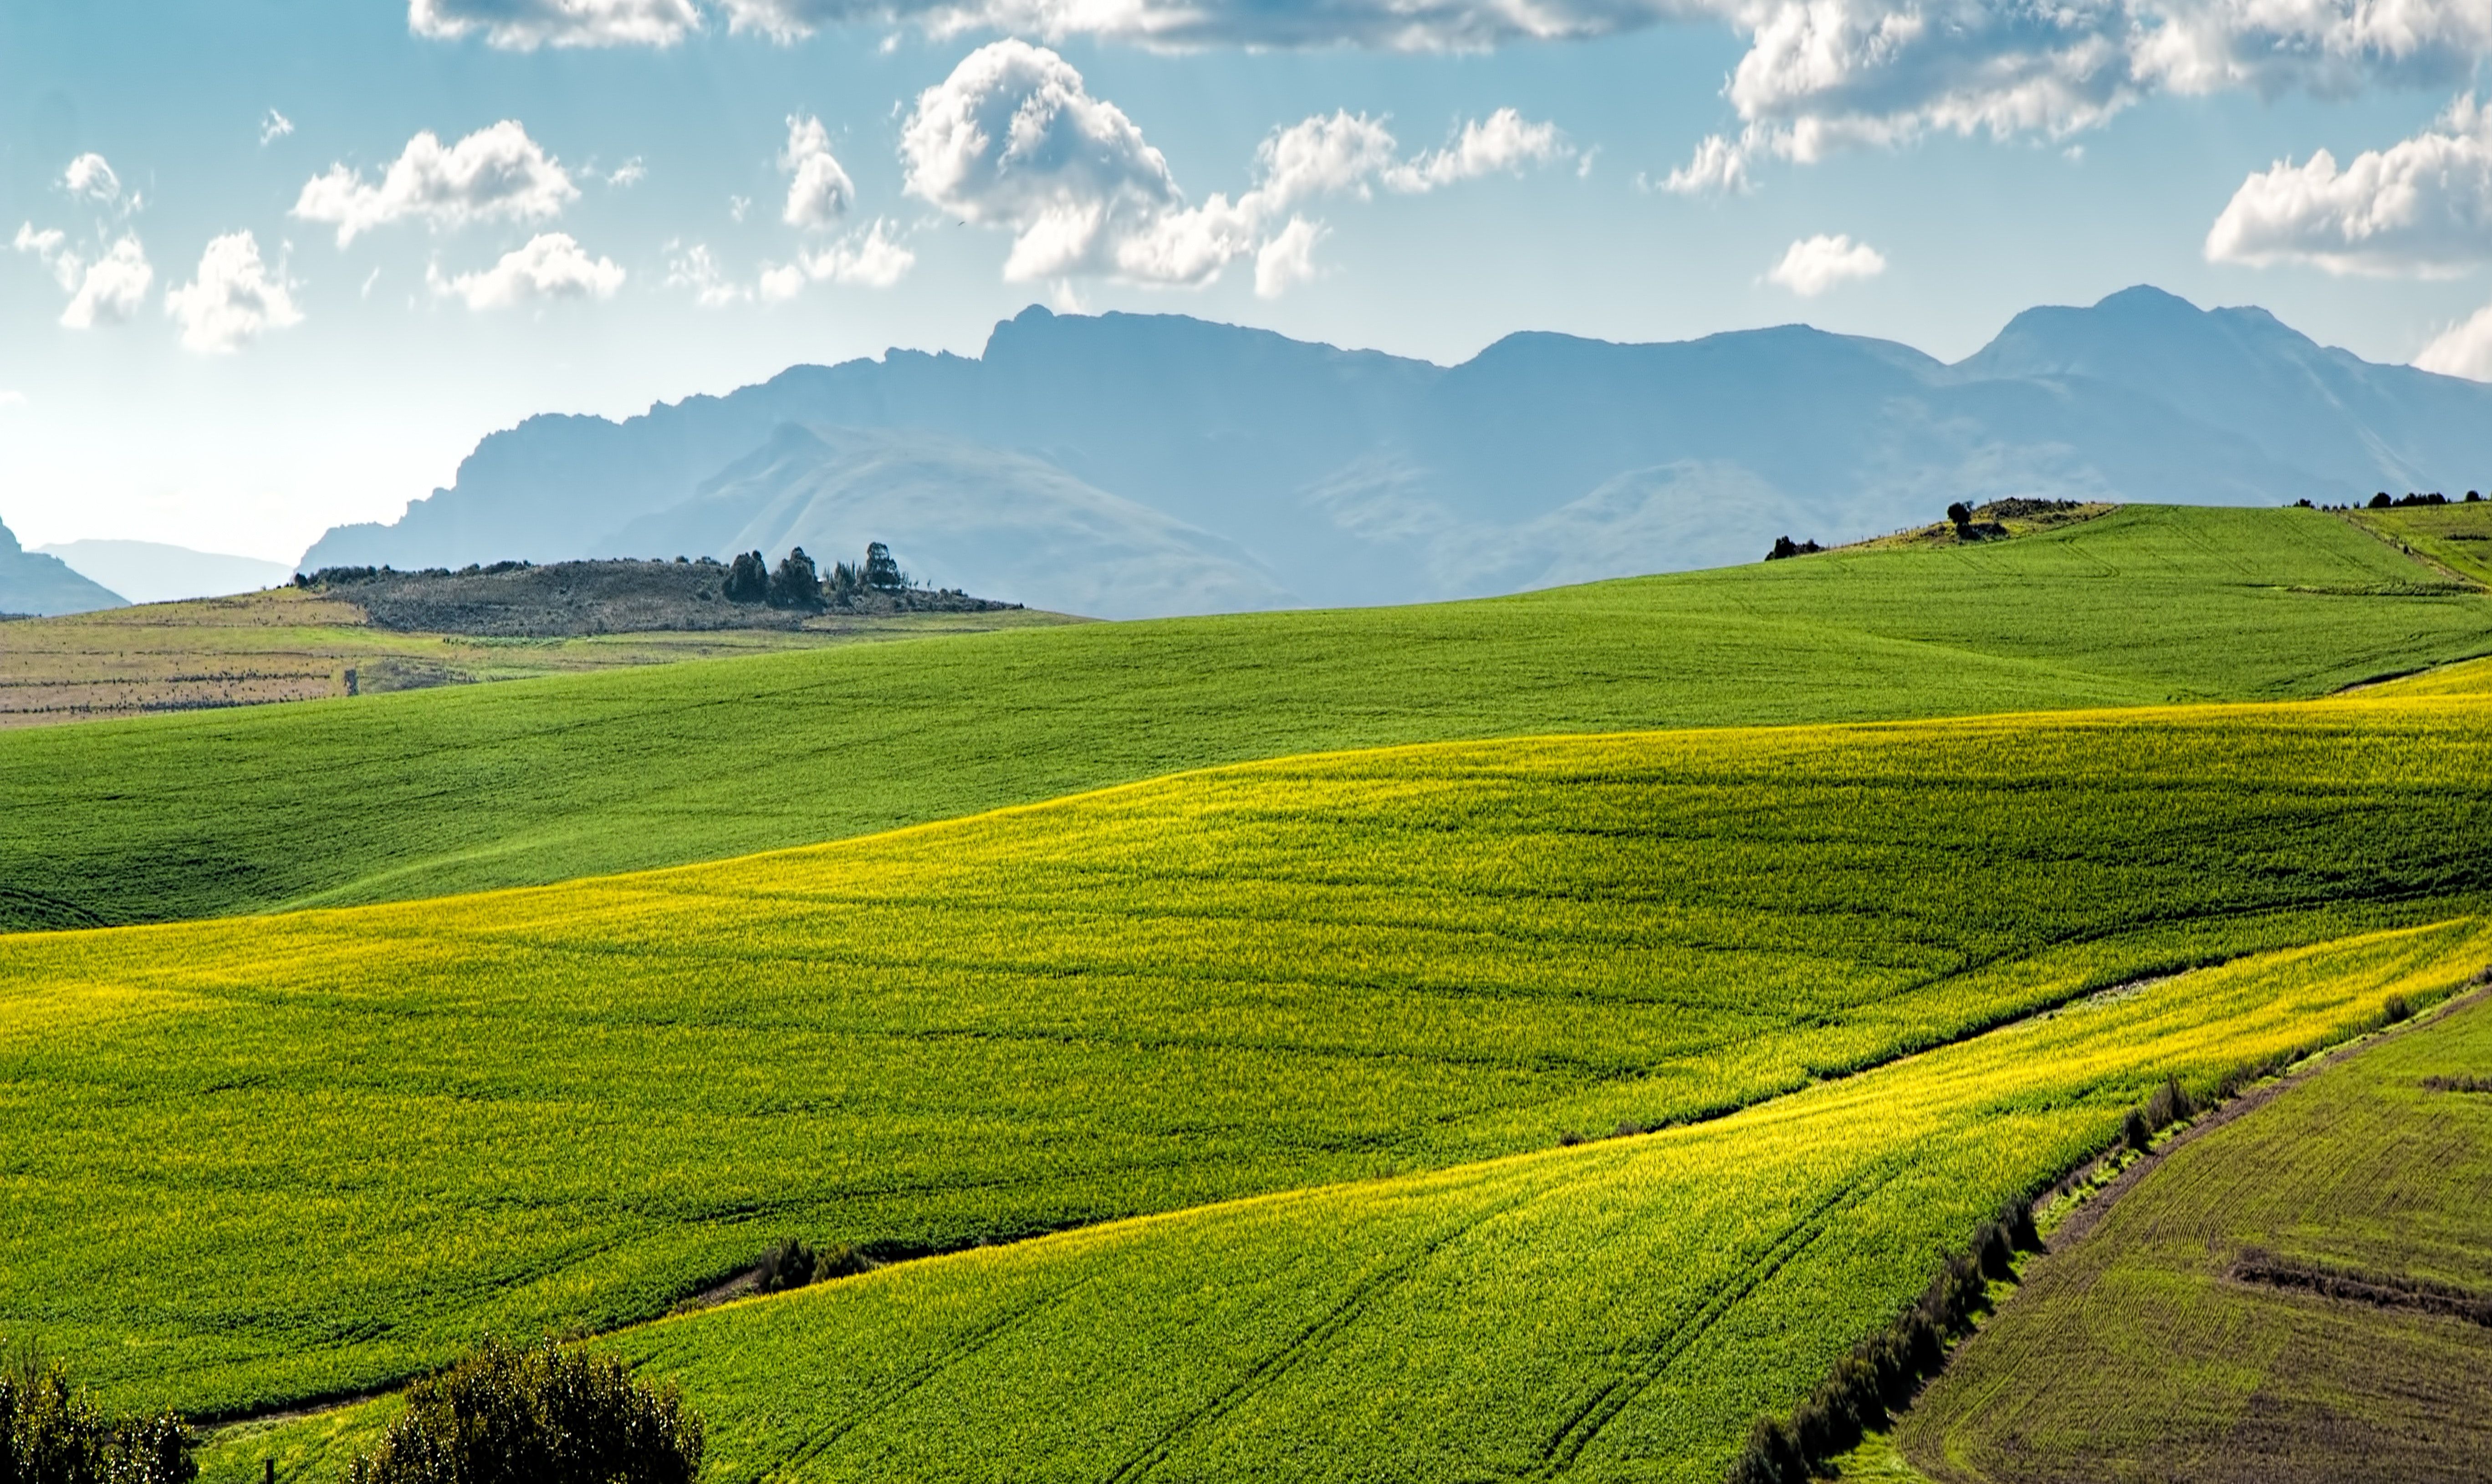 A landscape of a green field with yellow flowers and mountains in the background. - Farm